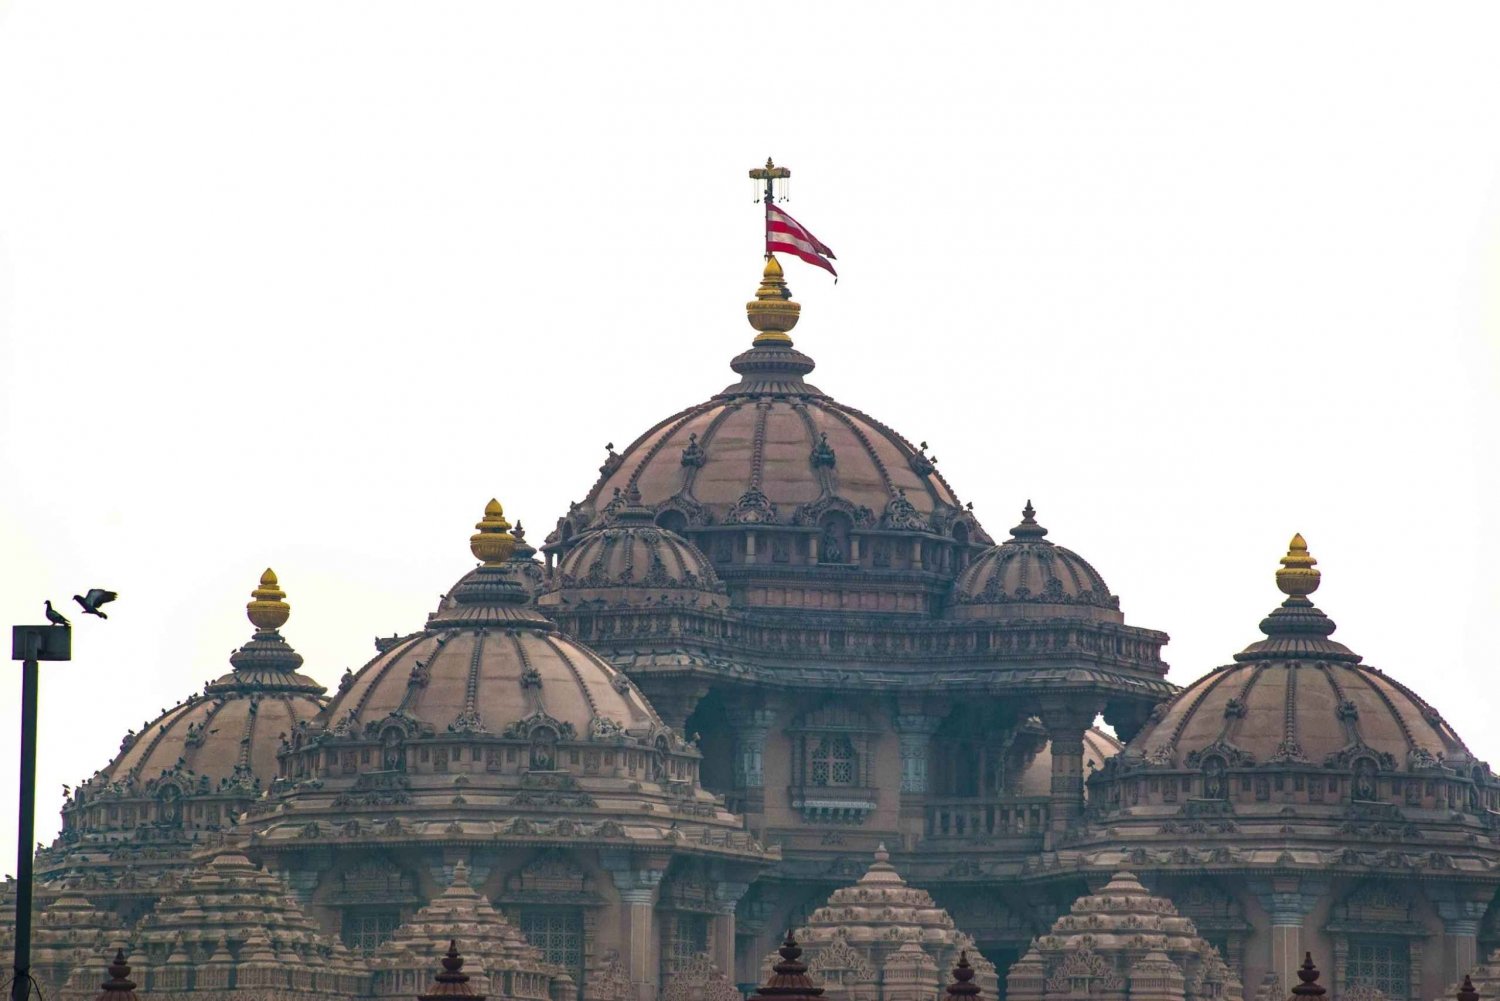 Delhi: Full Day Temples Tour with Transfers